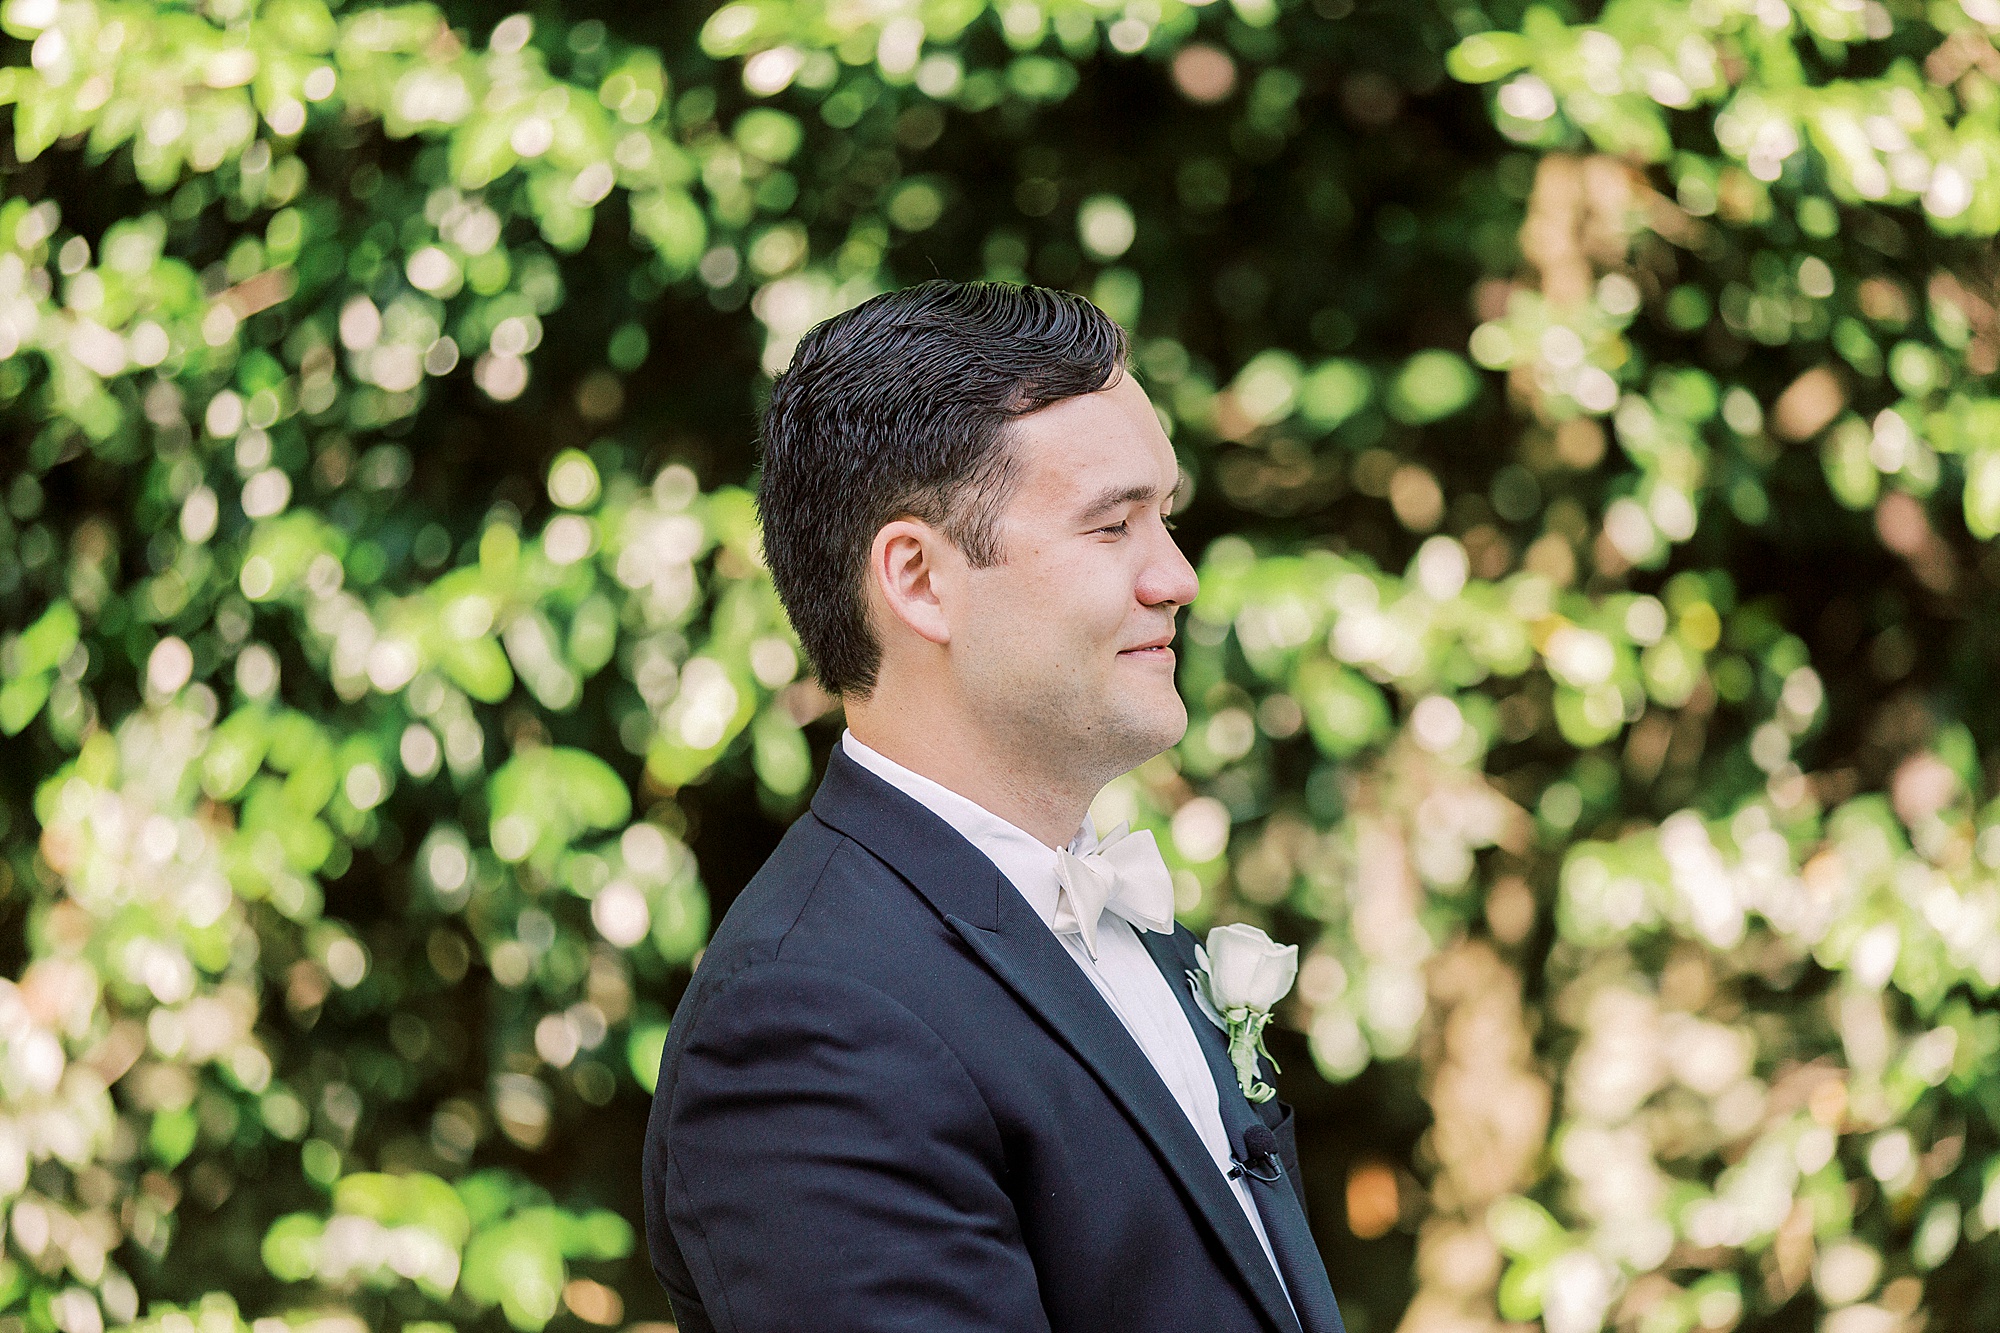 groom cries watching bride walking down aisle during outdoor wedding ceremony at Separk Mansion